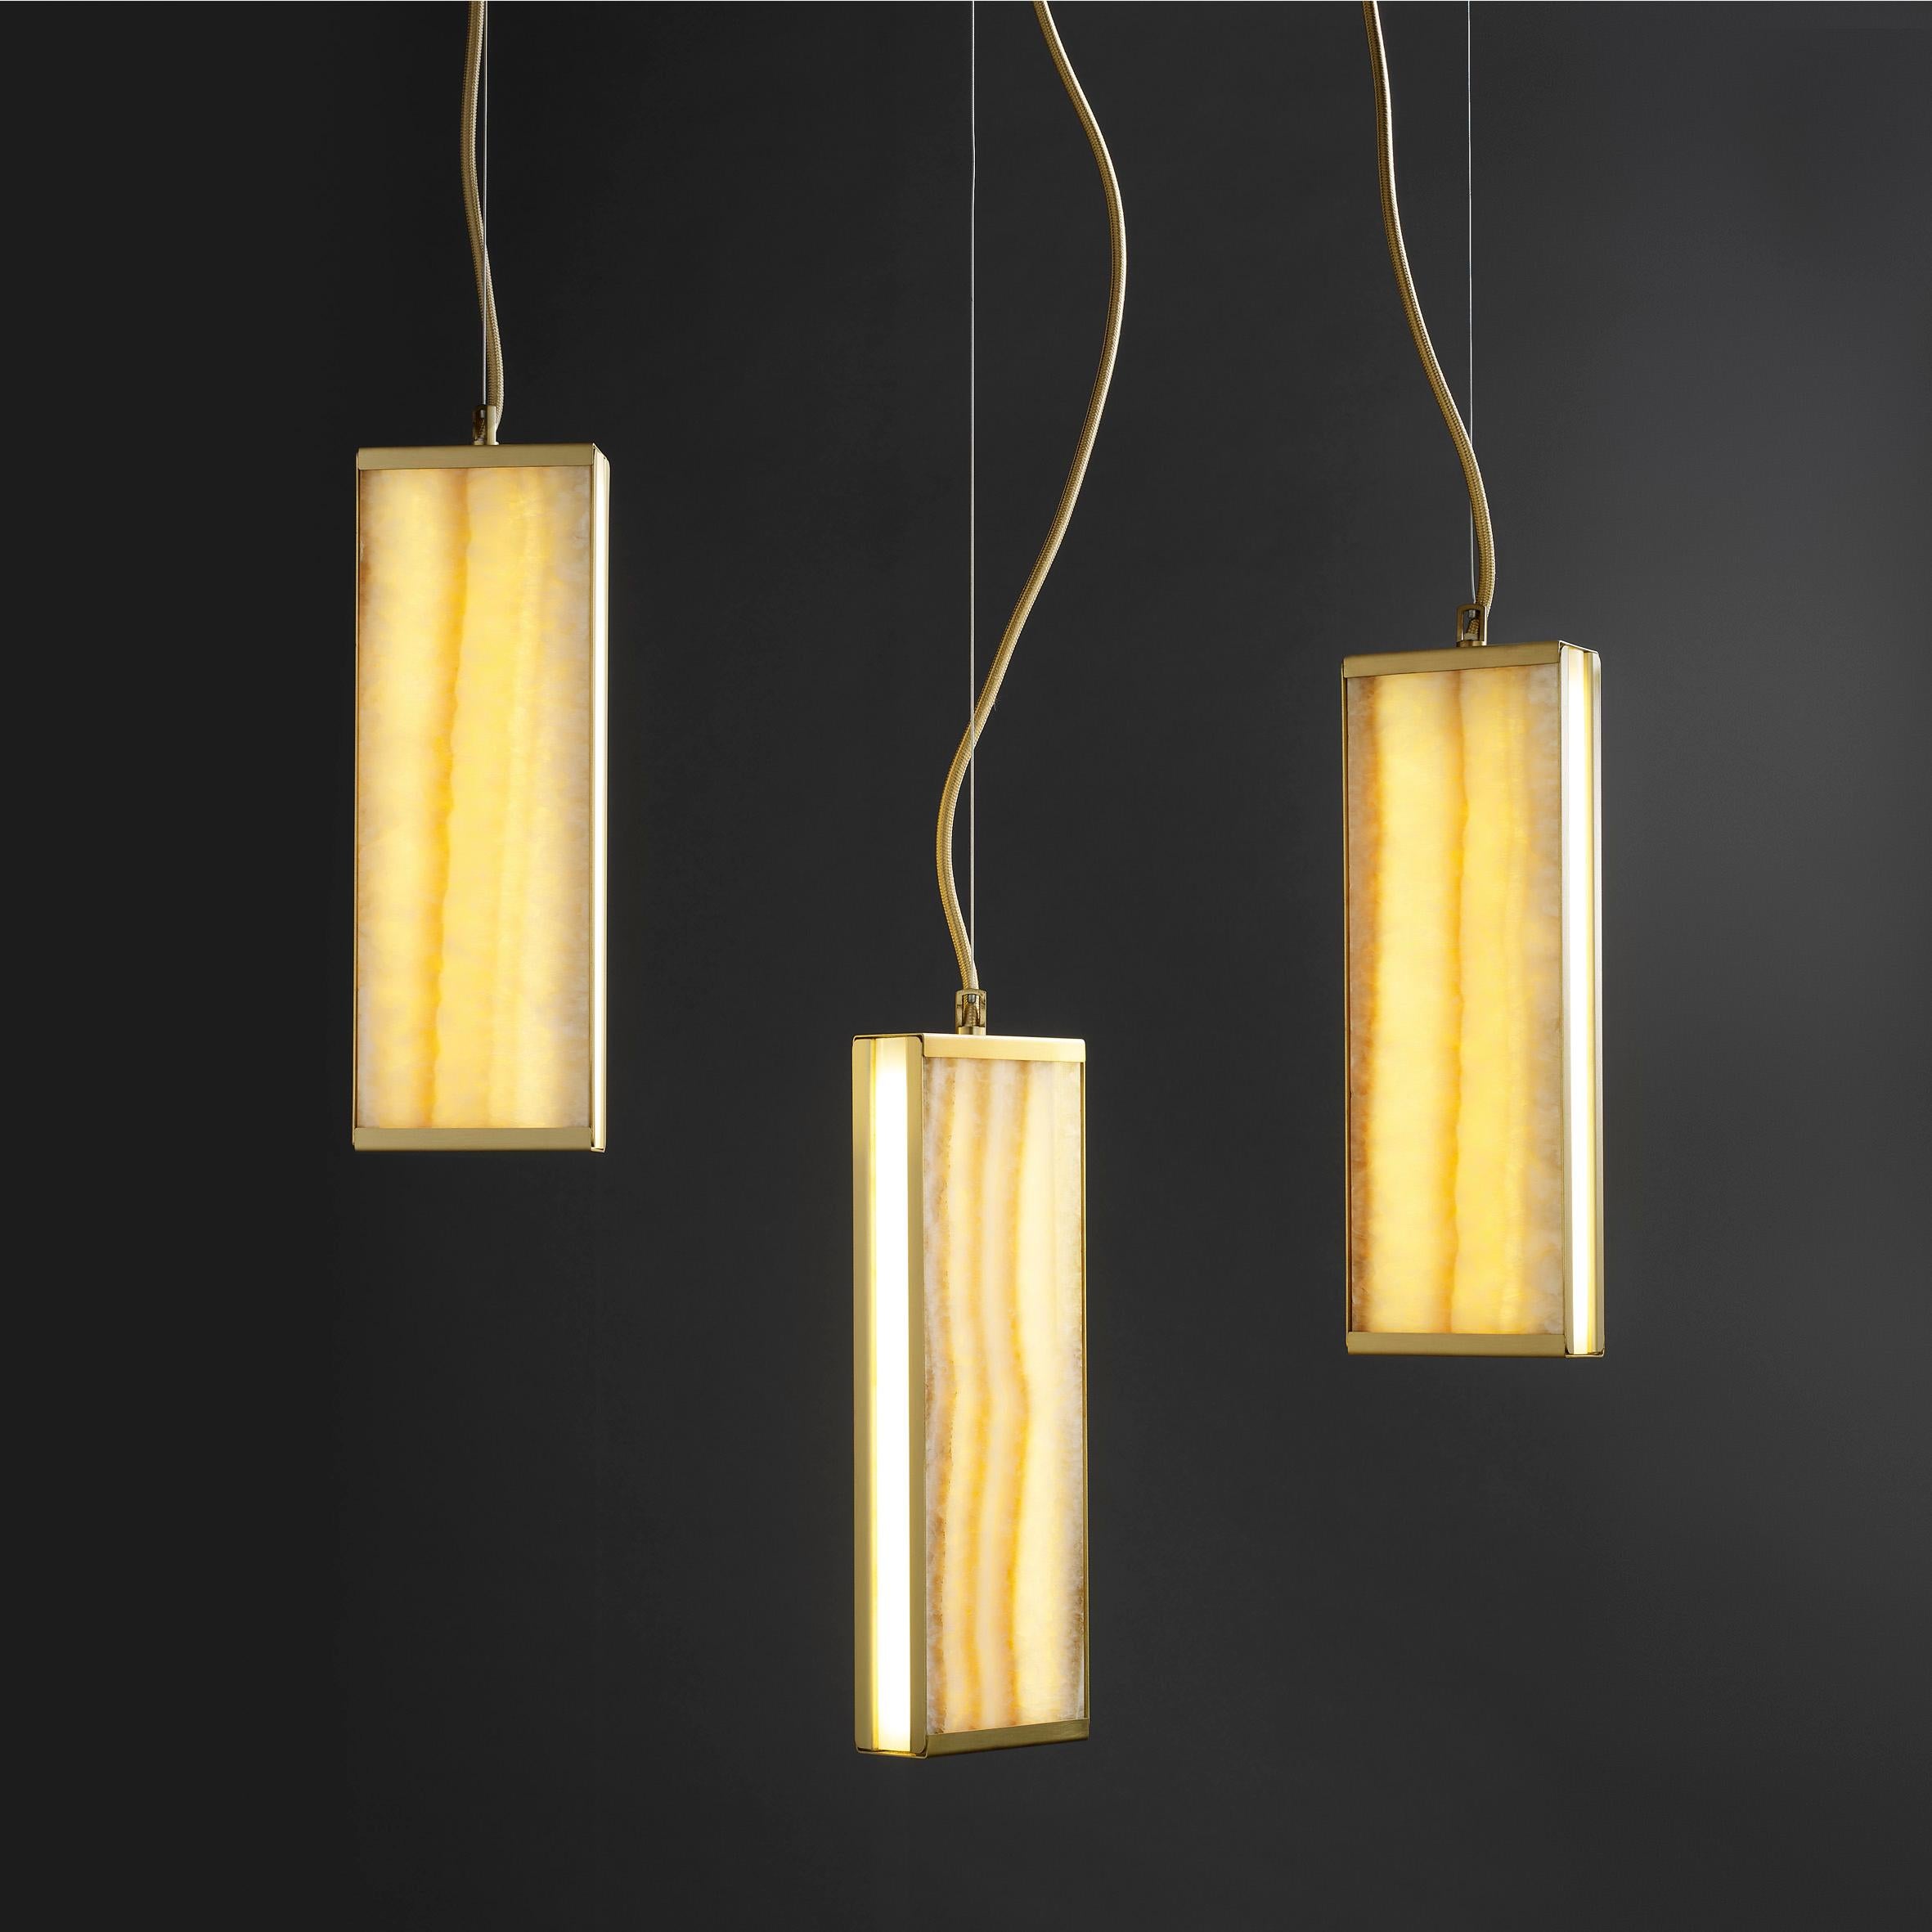 The drops suspension, composed of three adjustable modules placed vertically, creates a decisive stain of color, thanks to the warm tonality of the backlit onyx. At the same time, the white light side bars offer diffused illumination of the